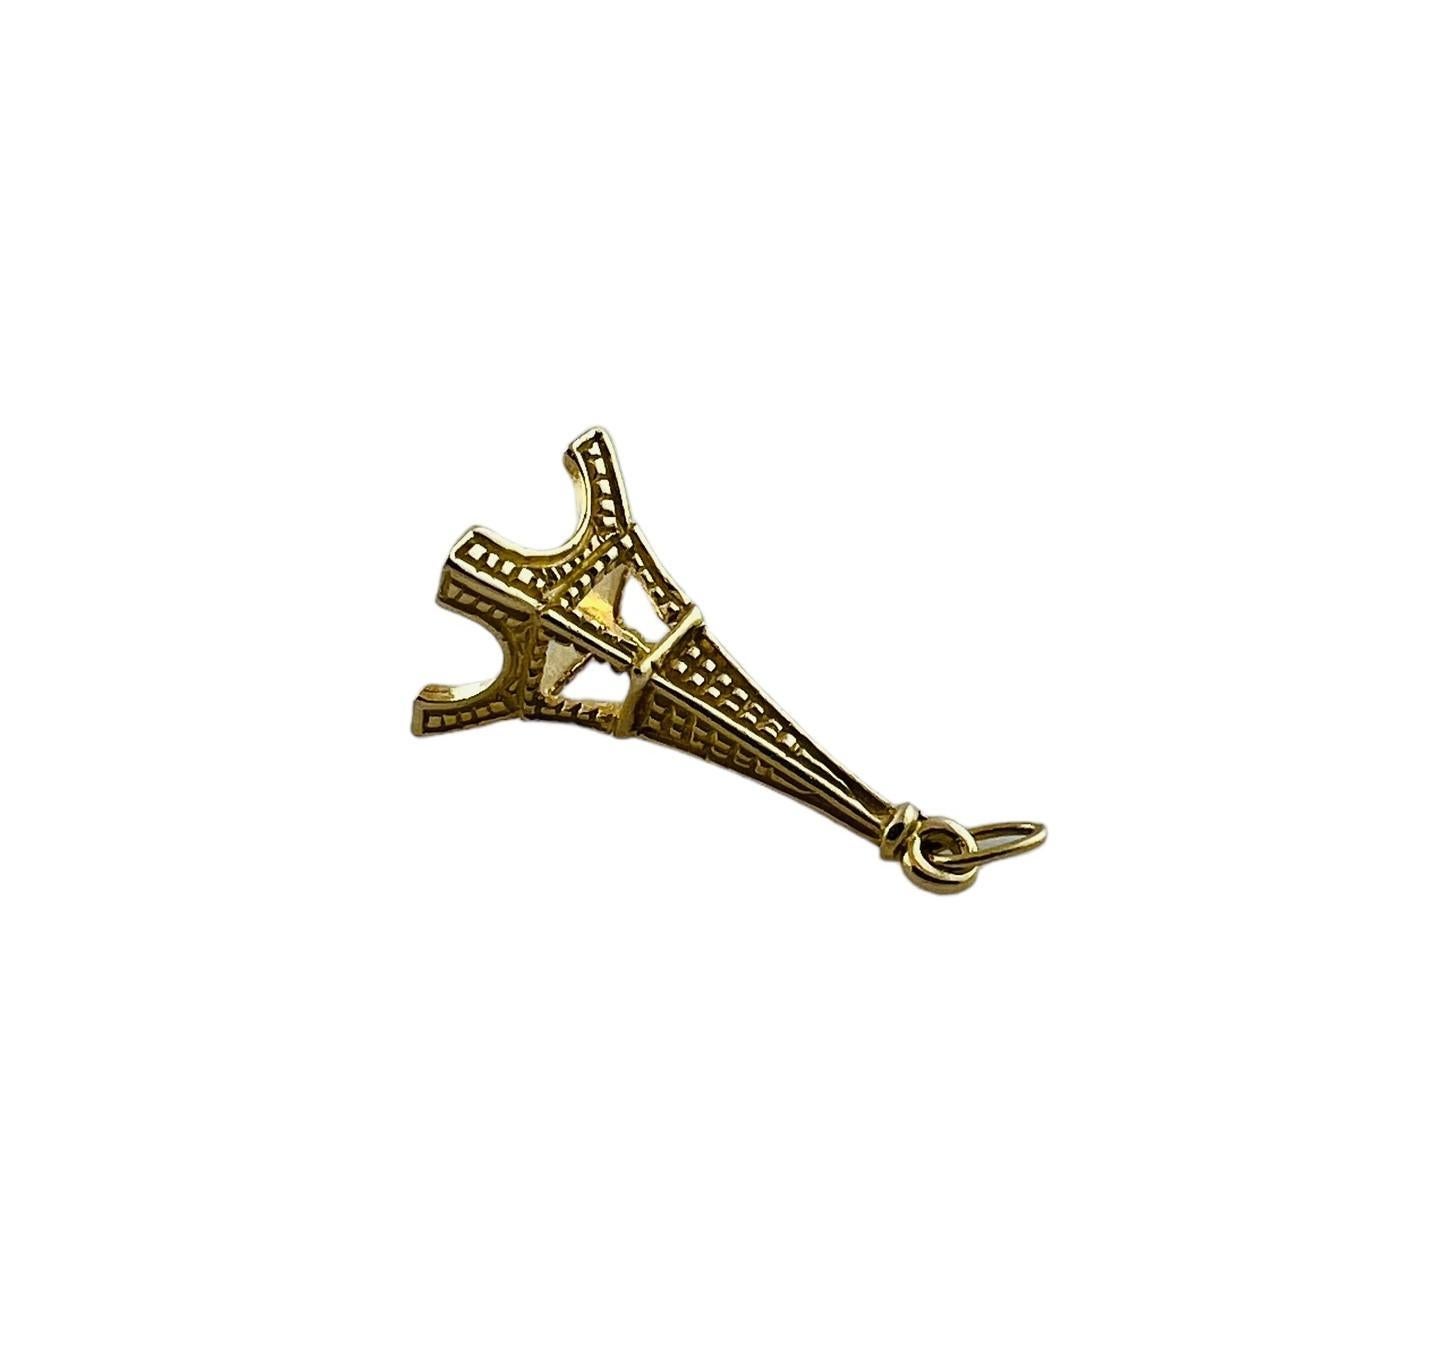 14K Yellow Gold Eiffel Tower Charm Pendant

This Eiffel tower charm  is set in 14K yellow gold

Charm measures approx. 22.3 x 10.7 x 10.7 mm

1.6 grams / 1.0 dwt

Acid tested for 14K

*Does not come with chain*

Very good preowned condition. 

Will